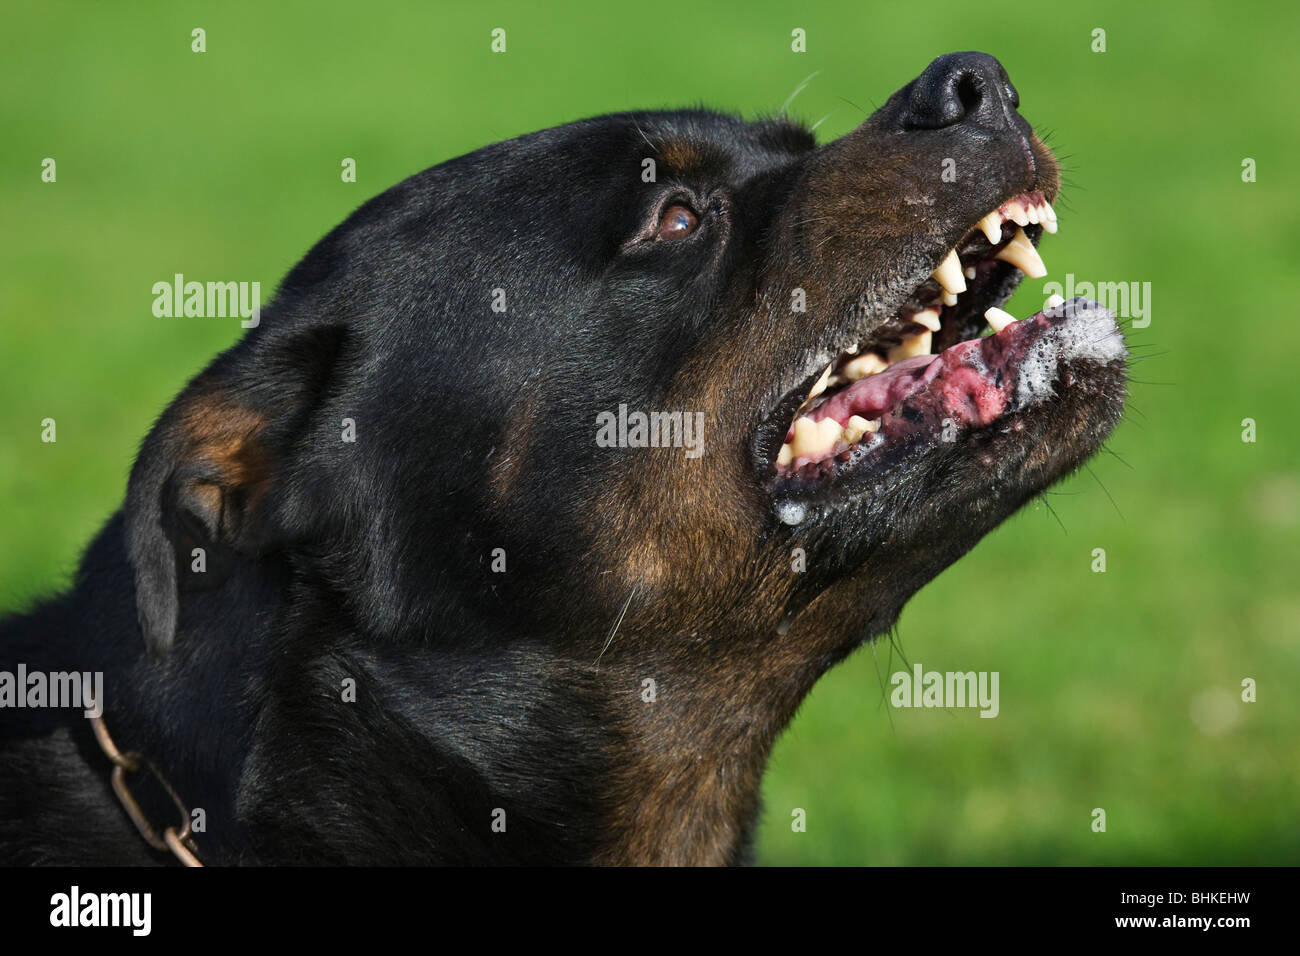 Rottweiler (Canis lupus familiaris) showing teeth in garden Stock Photo